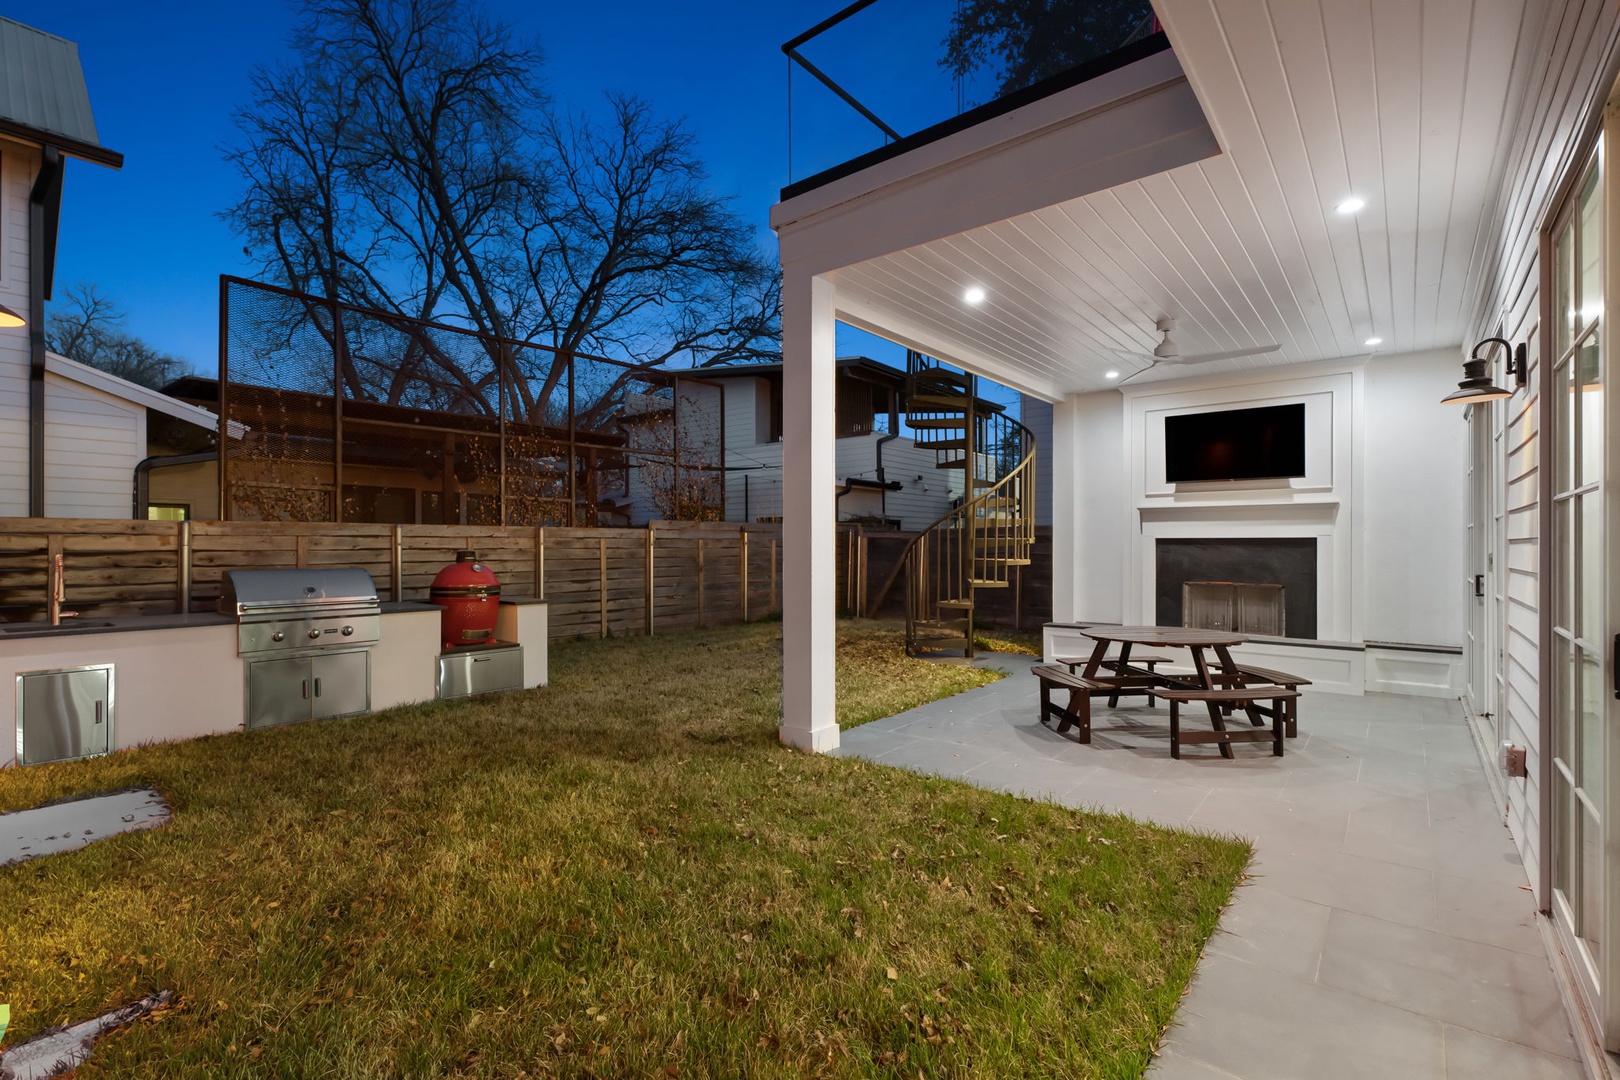 Back yard with outdoor dining area and grill